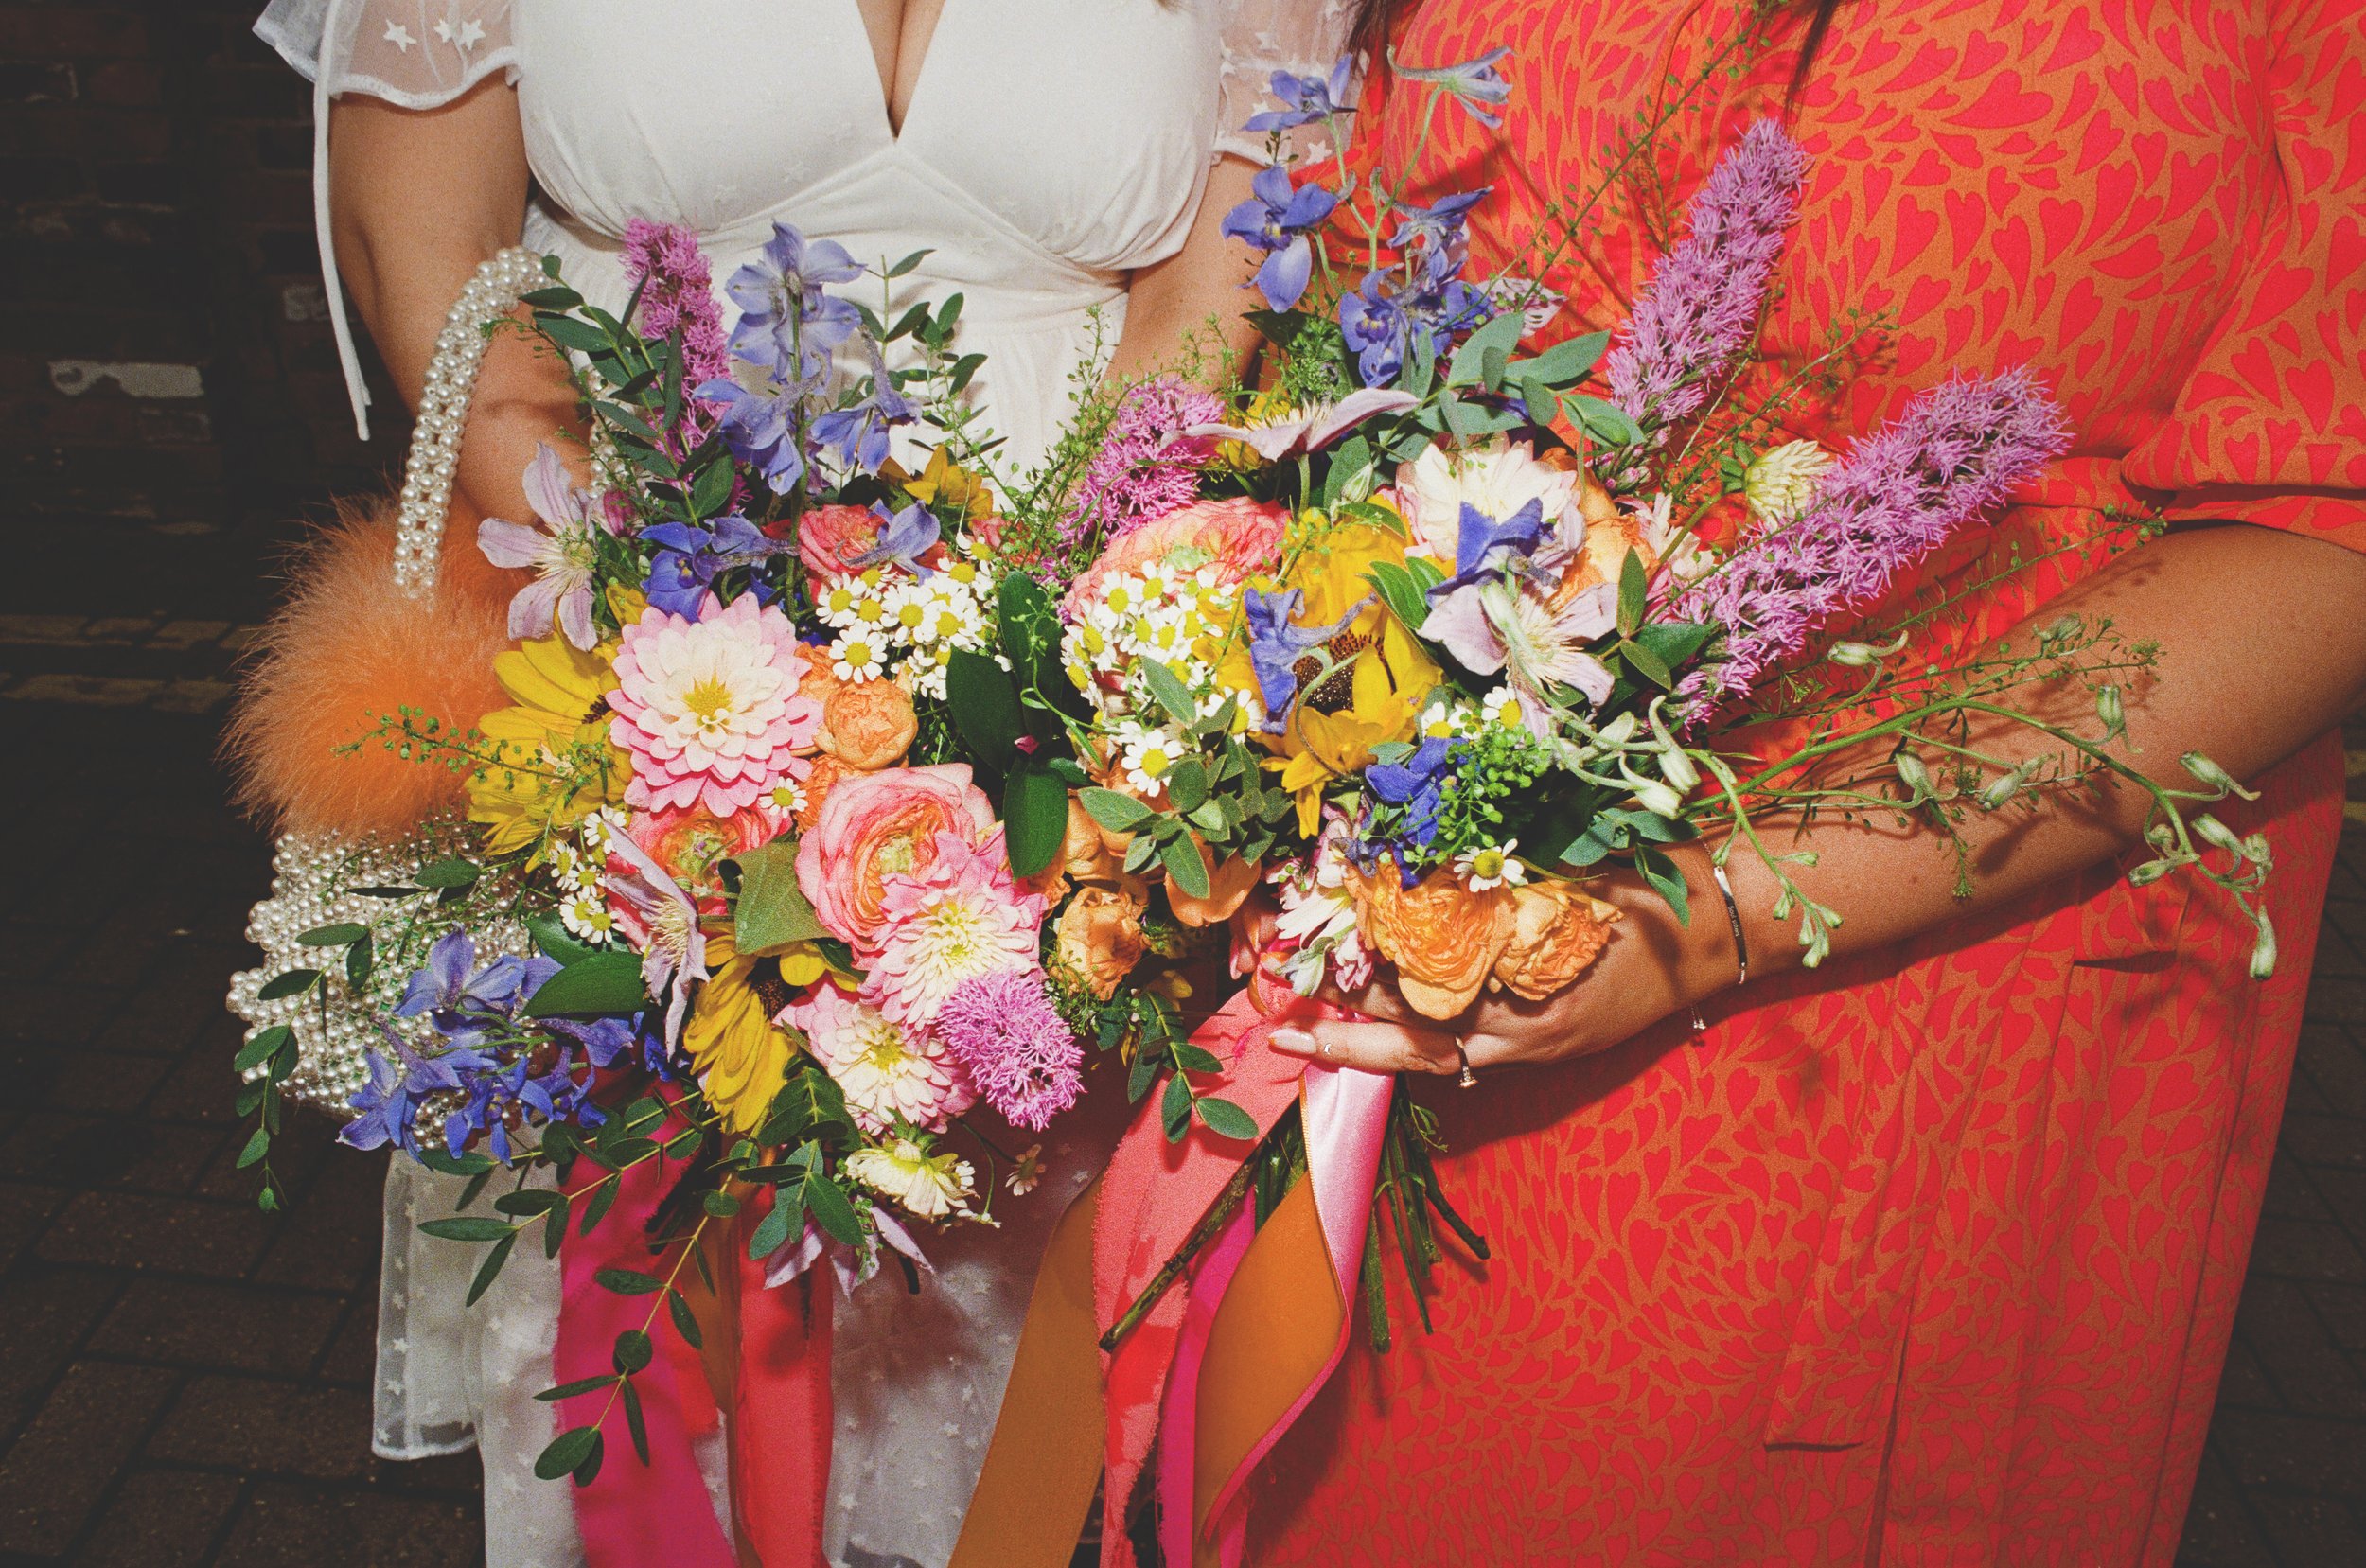  A close up image of the bride’s and bridesmaids fun wedding bouquets.  Both the hand-tied bouquets are unique but have similar bright, modern flowers incorporated and tied with bright pink &amp; orange ribbons.  Photo by Belles Confetti Photography 